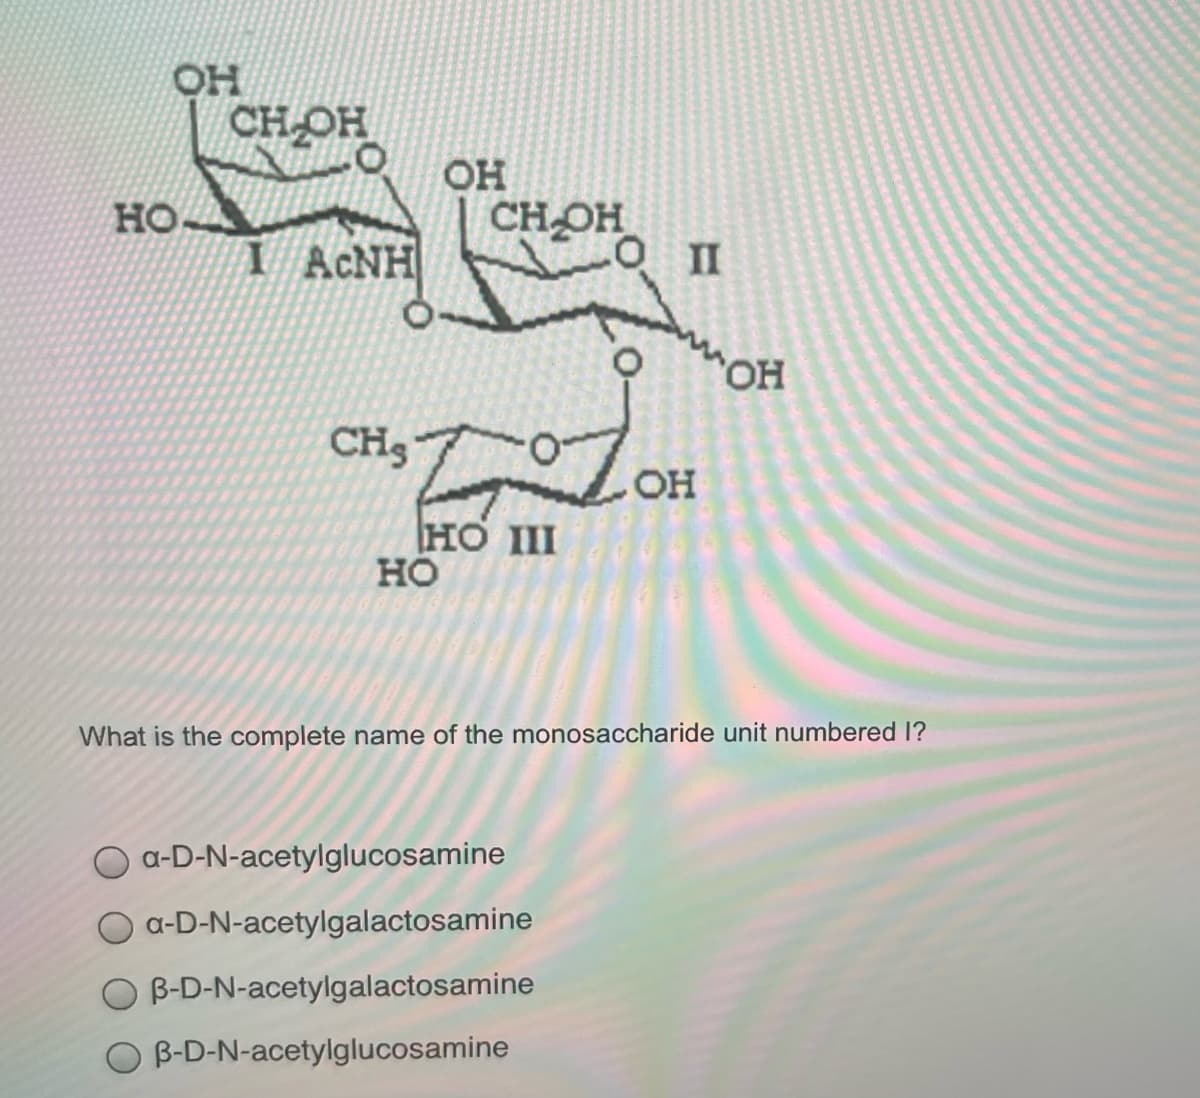 OH
CH OH
OH
но.
CHOH
I ACNH
"OH
CH3
OH
HO II
но
What is the complete name of the monosaccharide unit numbered 1?
a-D-N-acetylglucosamine
a-D-N-acetylgalactosamine
B-D-N-acetylgalactosamine
O B-D-N-acetylglucosamine
